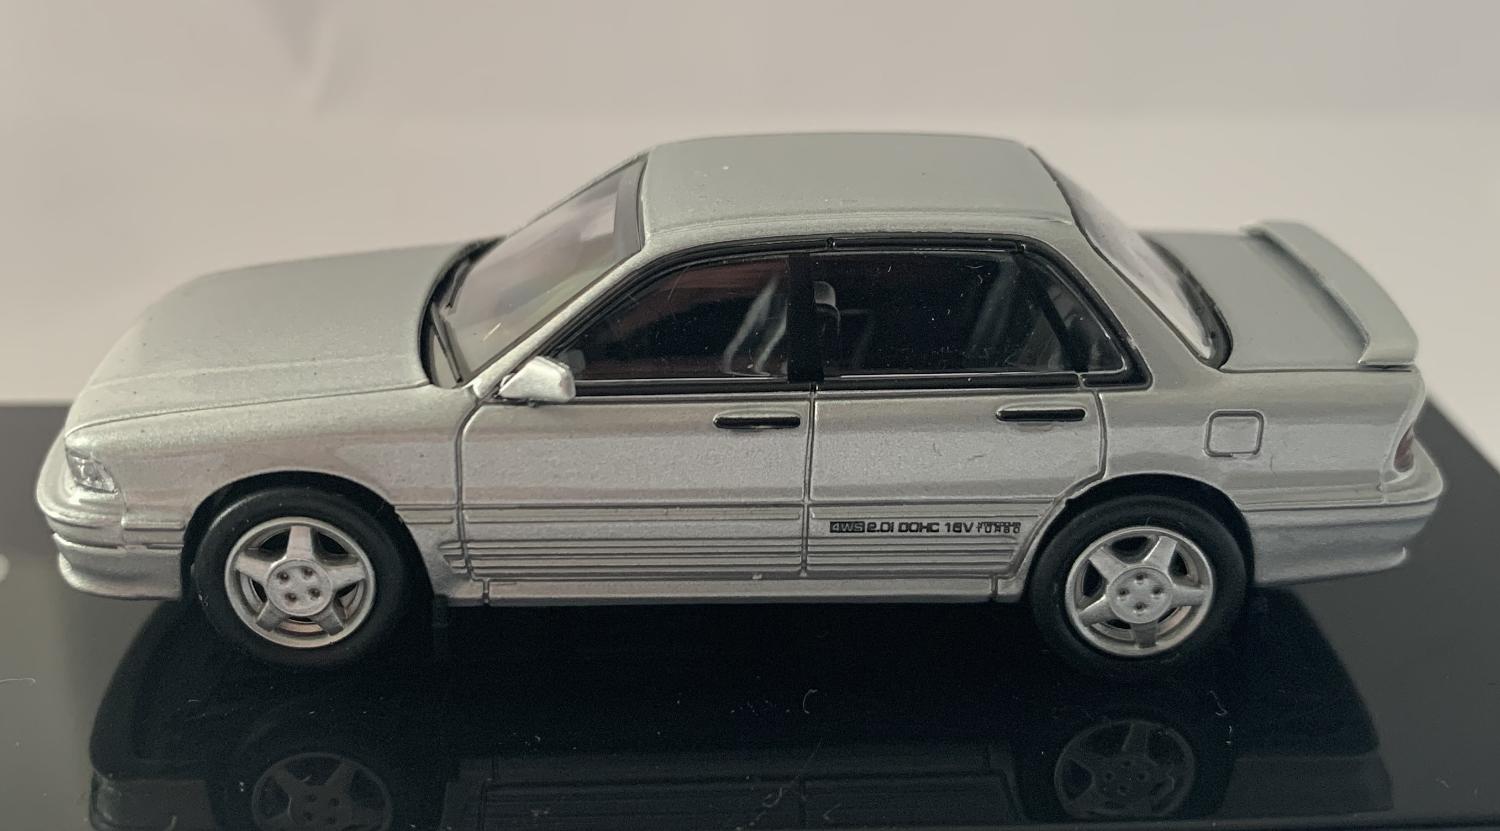 Mitsubishi Motors Galant VR-4 in grace silver 1:64 scale model from Paragon Models